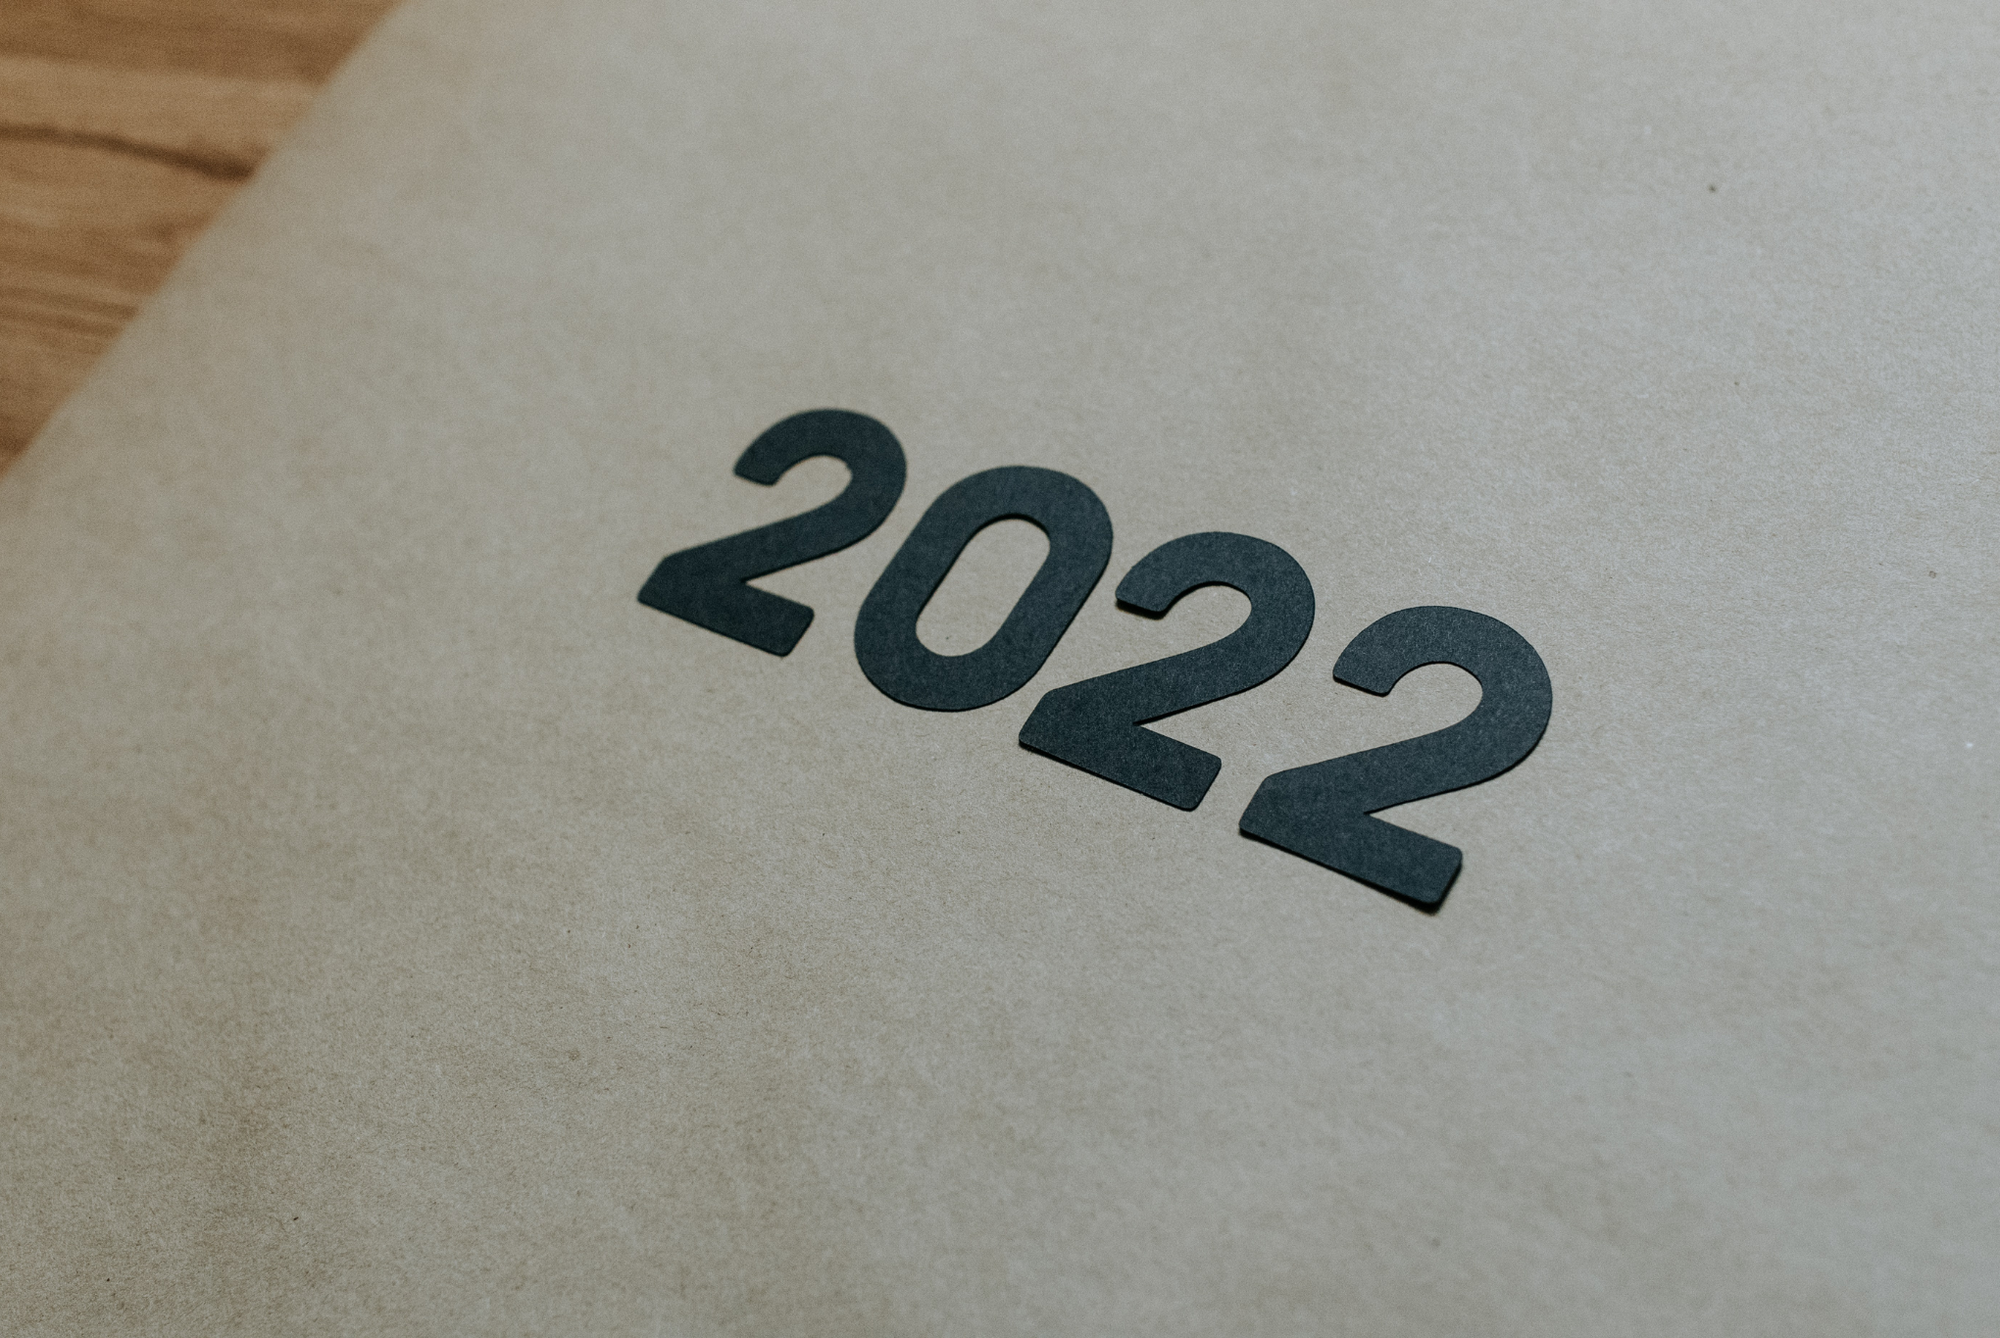 2022 ... the year things changed!